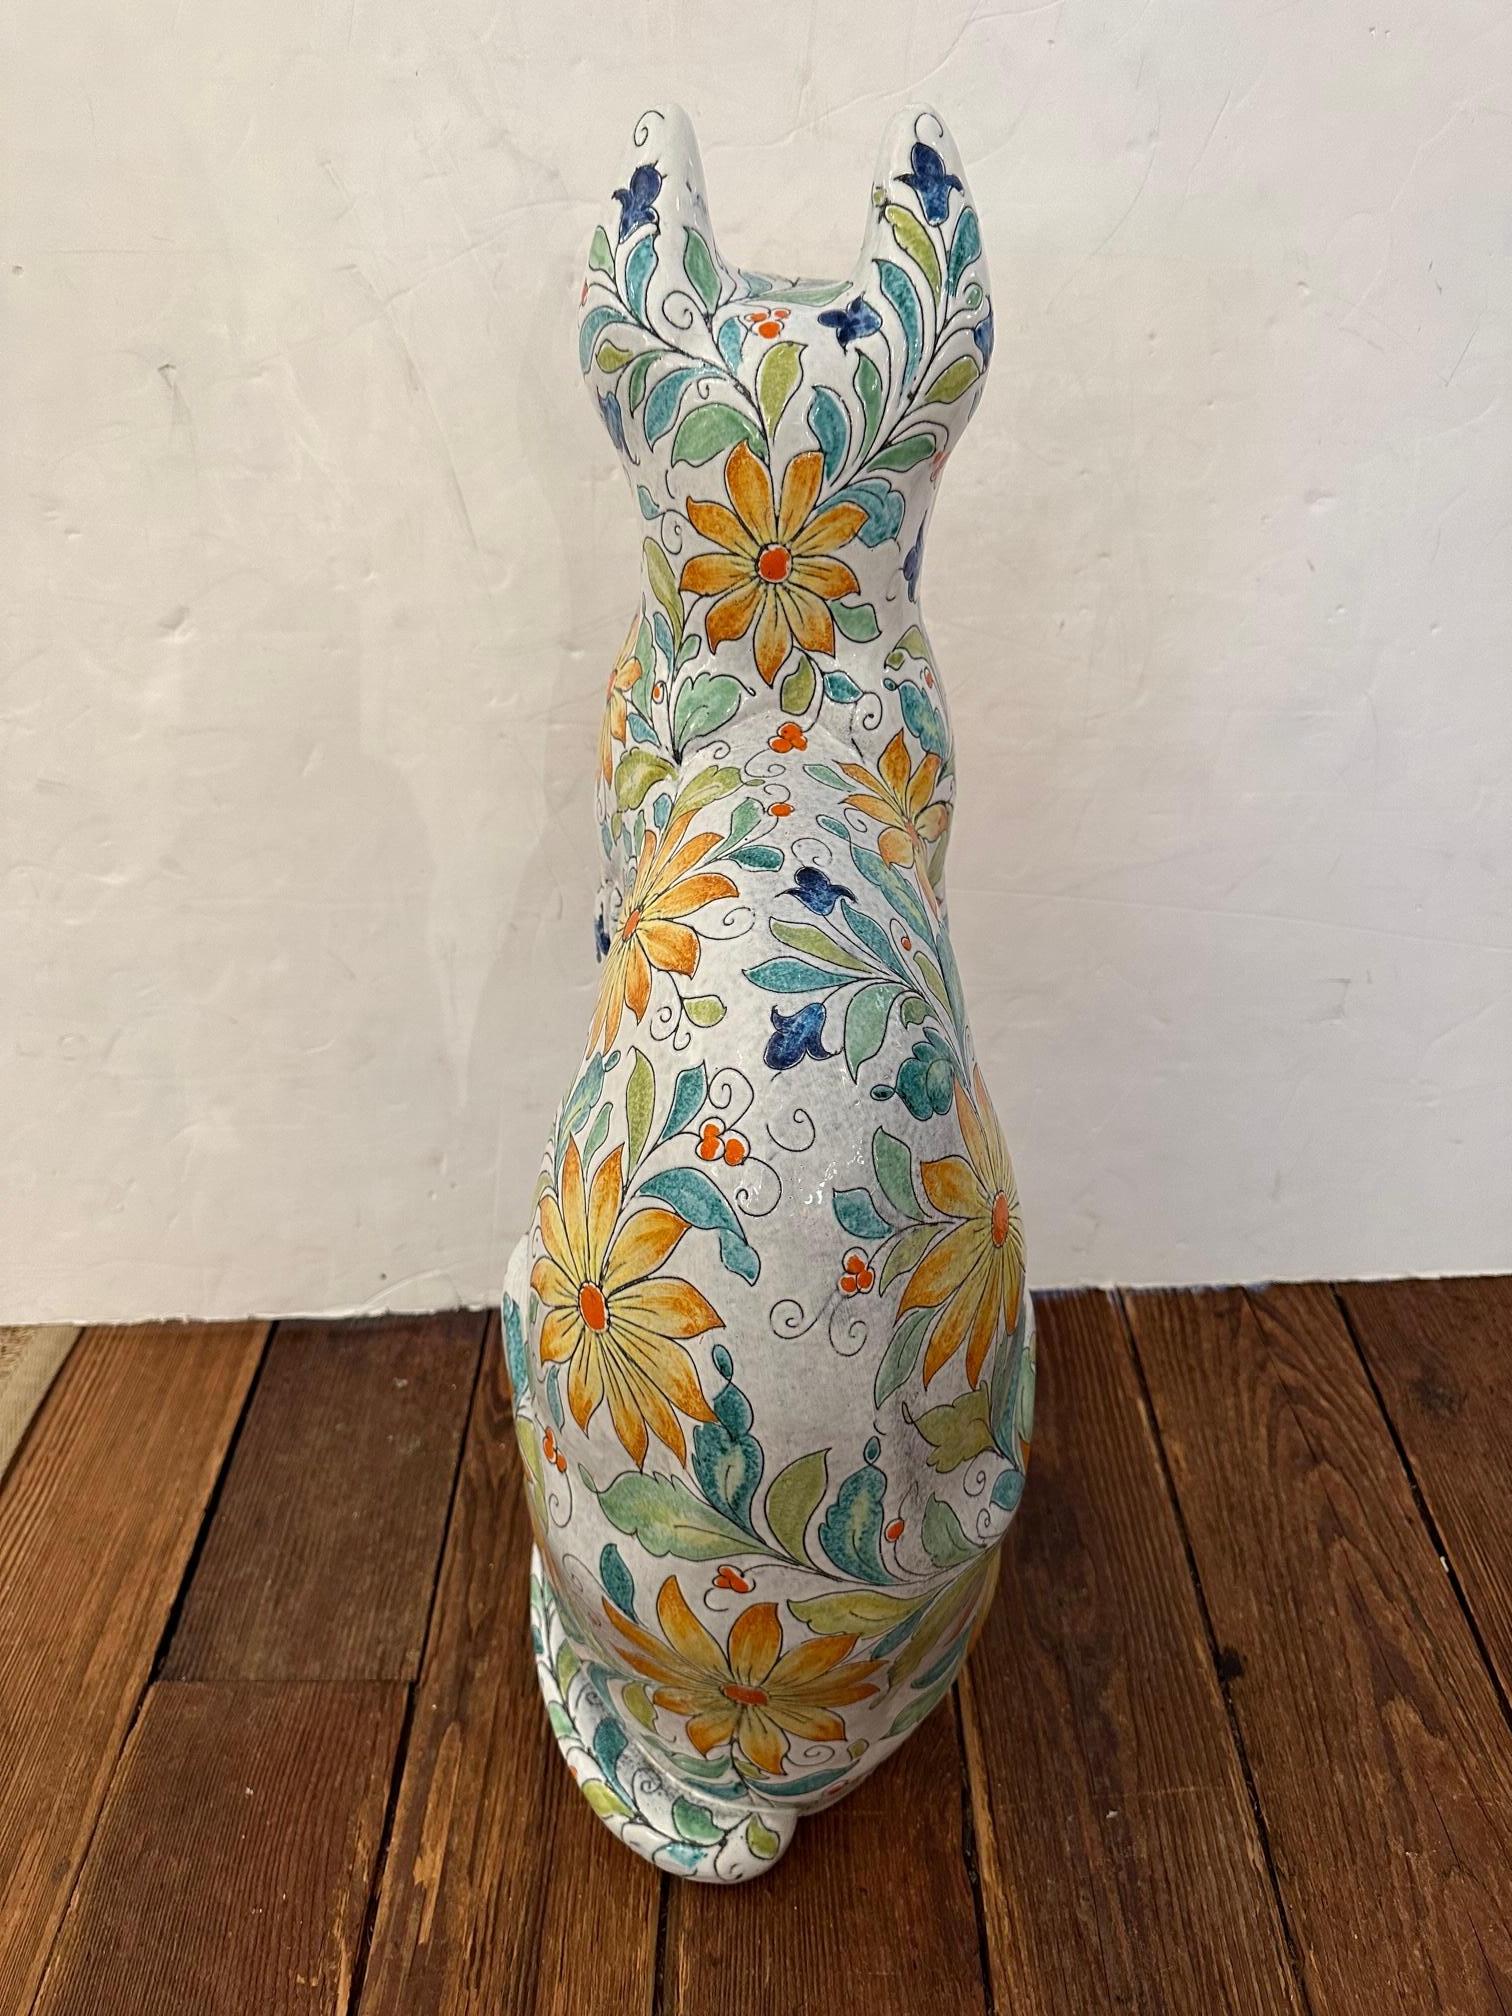 Large striking Italian Egyptian inspired terracotta statue of a beautifully glazed and decorated cat with floral designs with green, turquoise, yellow and orange against a white background. It dates to the late 20th century and is a fine